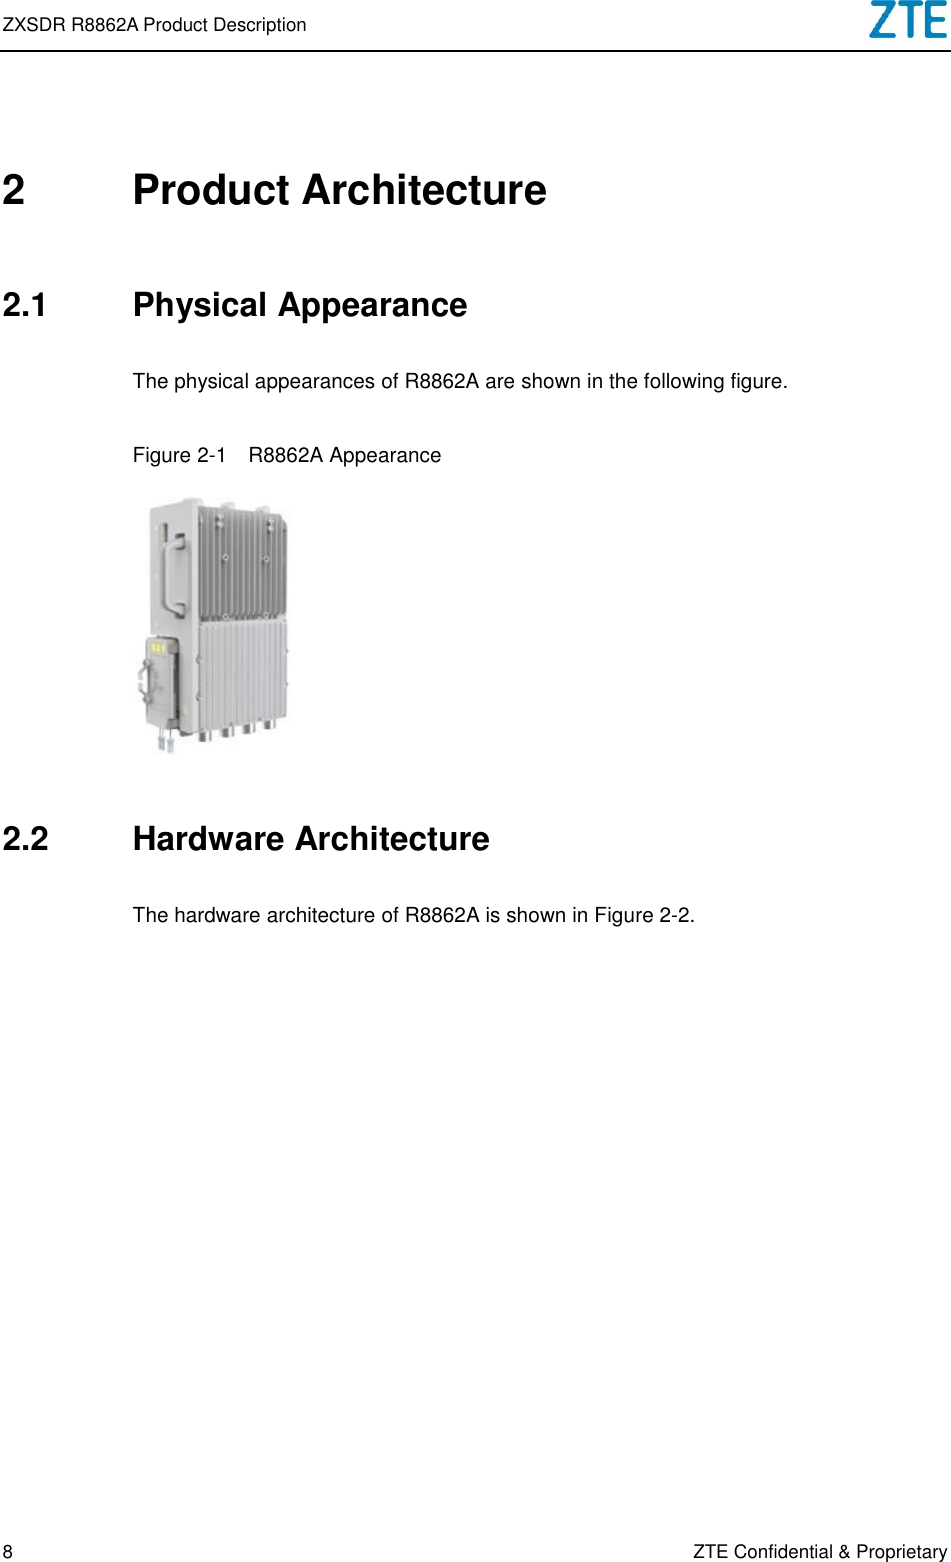 ZXSDR R8862A Product Description   8 ZTE Confidential &amp; Proprietary 2  Product Architecture 2.1  Physical Appearance The physical appearances of R8862A are shown in the following figure. Figure 2-1  R8862A Appearance  2.2  Hardware Architecture The hardware architecture of R8862A is shown in Figure 2-2. 